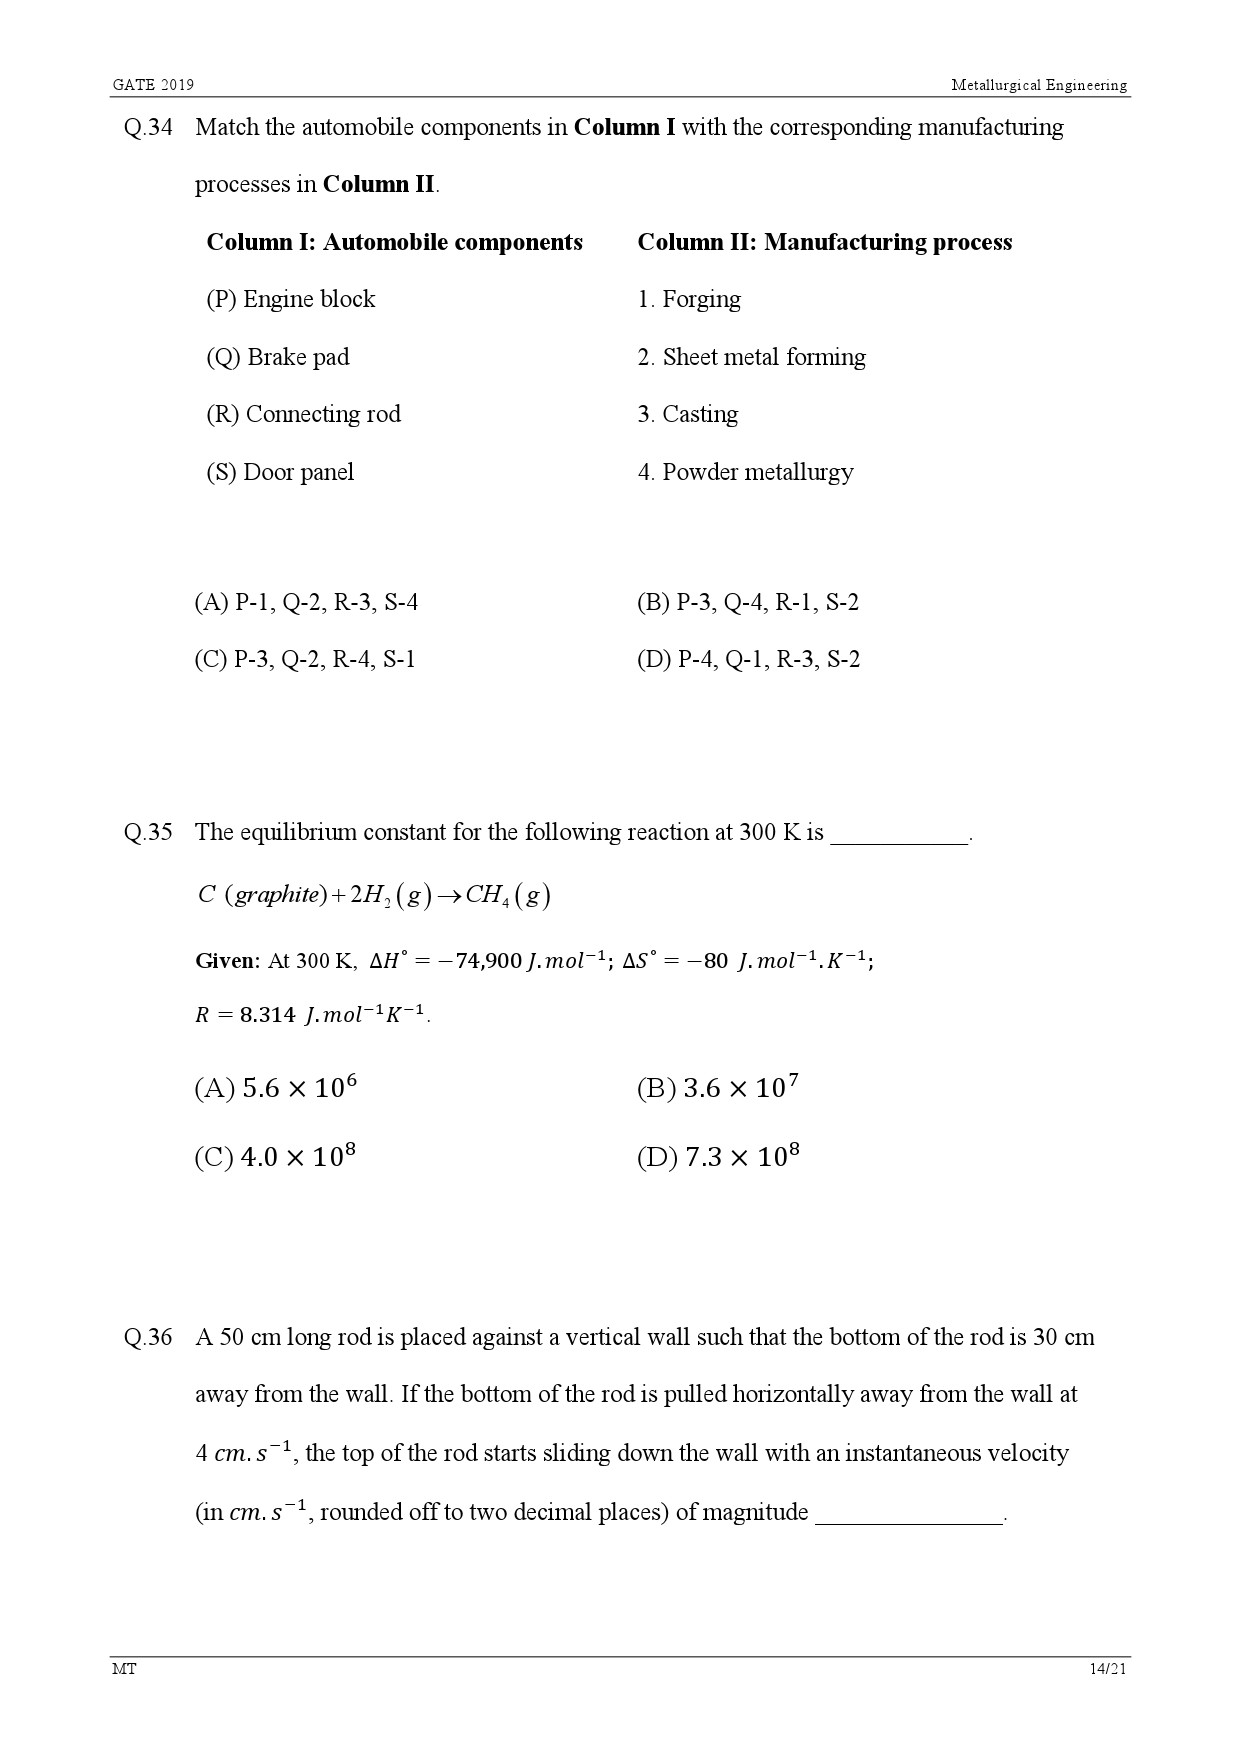 GATE Exam Question Paper 2019 Metallurgical Engineering 17